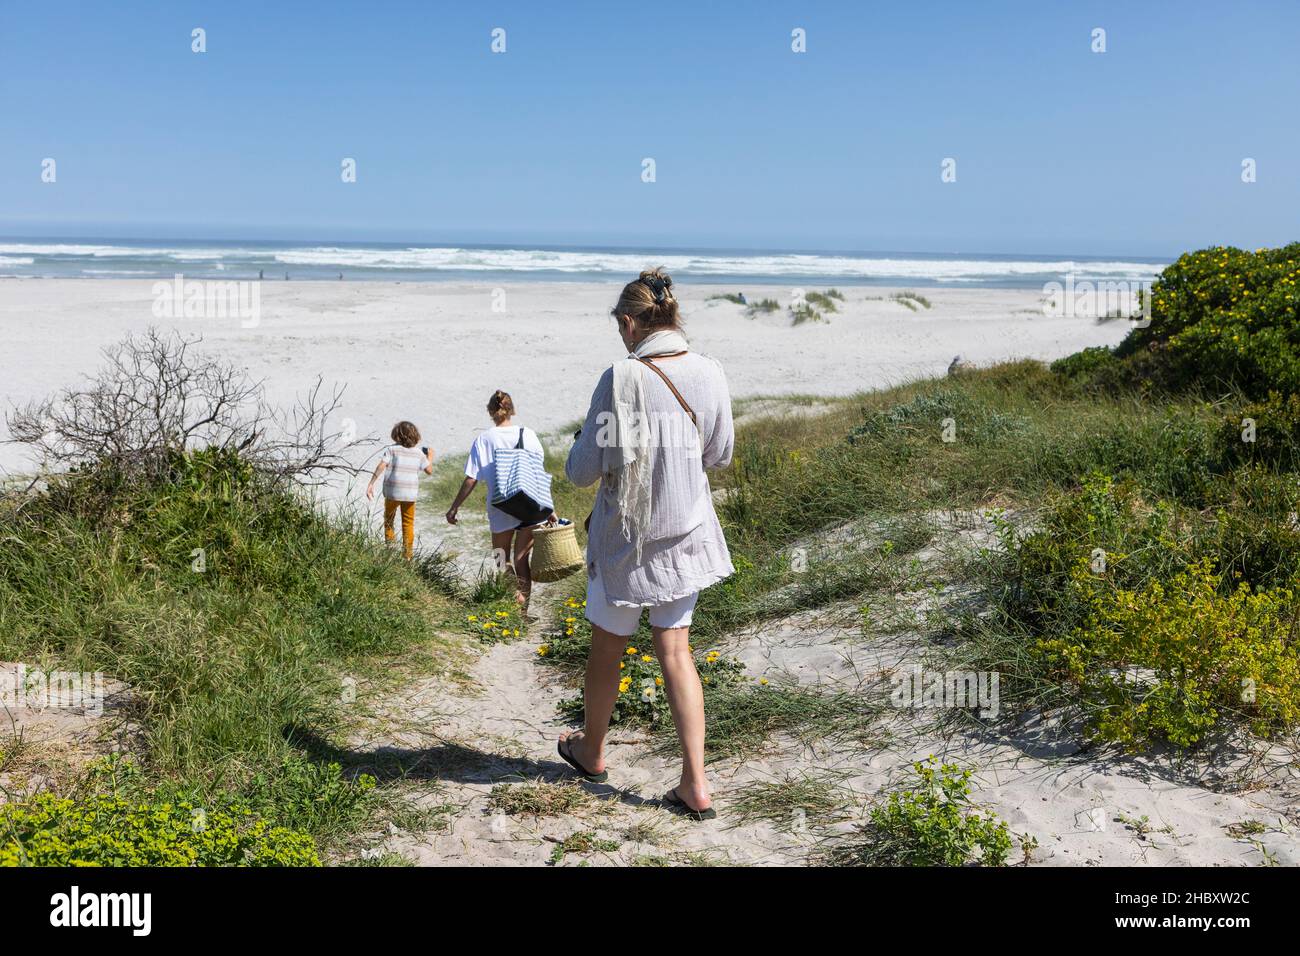 A family walking through the sand dunes towards the ocean with baskets and bags. Stock Photo